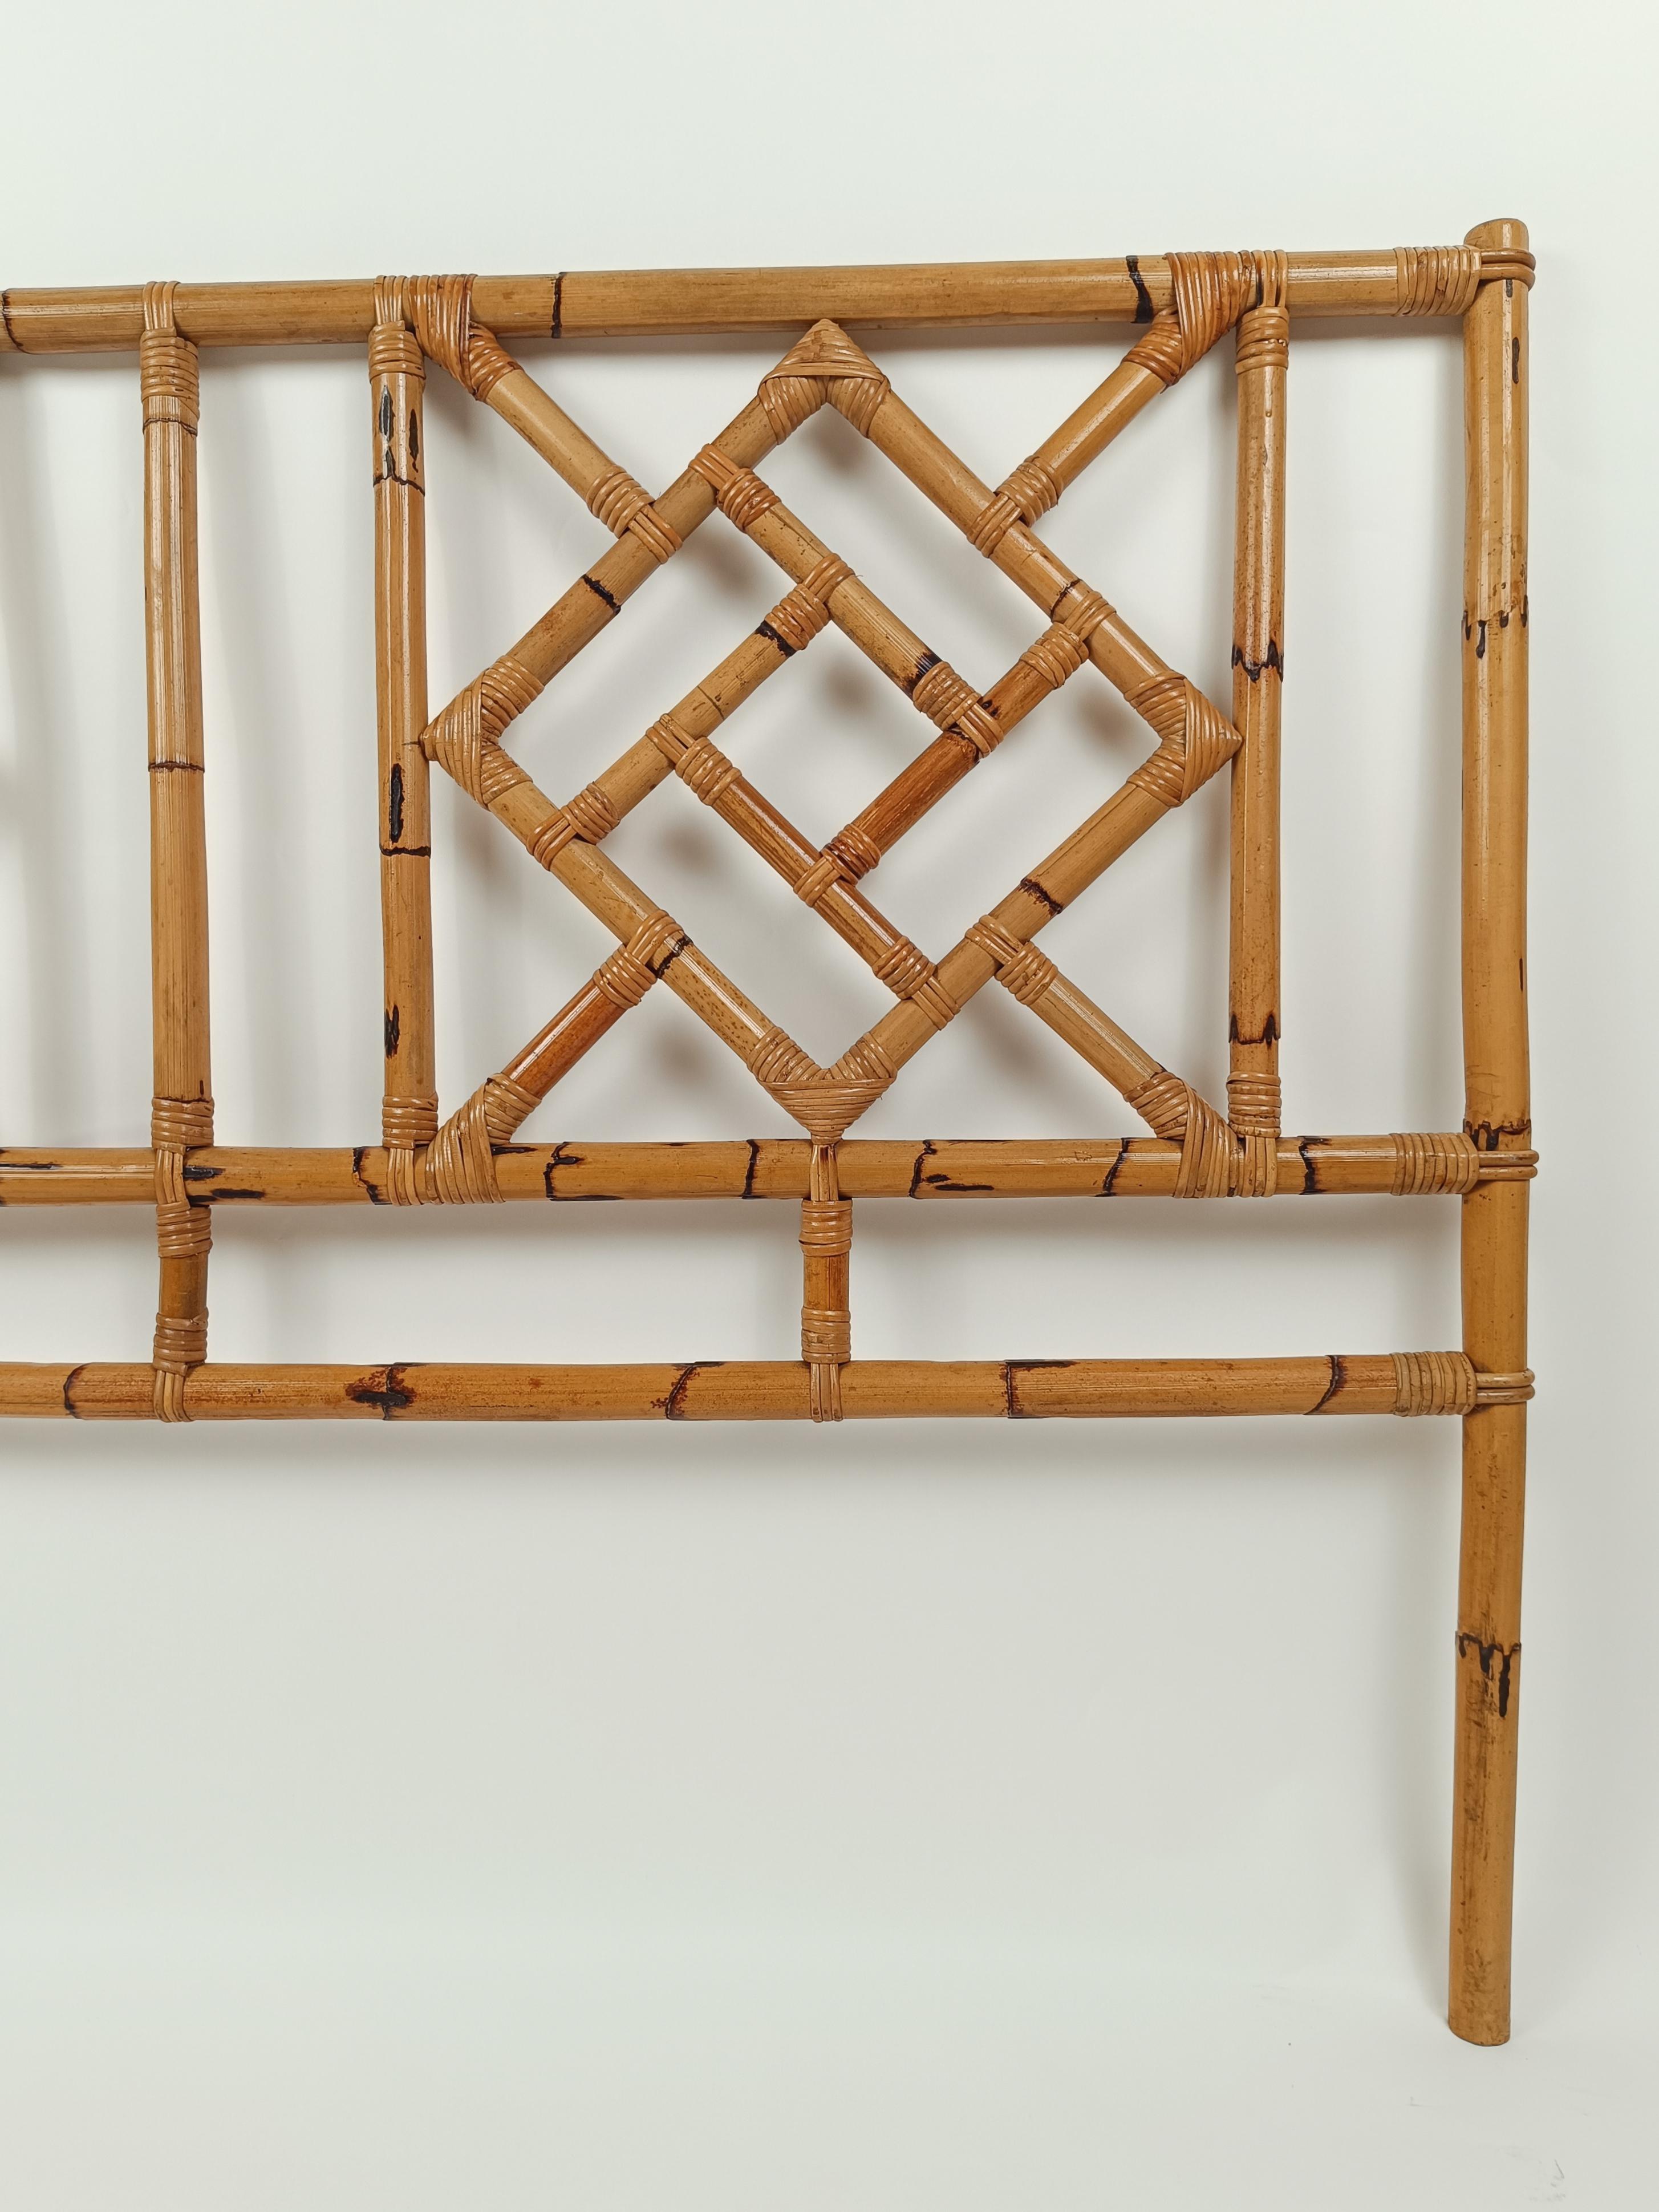  MId 20th Century Bamboo and Rattan Bed Headboard in Chinese Chippendale style  For Sale 4